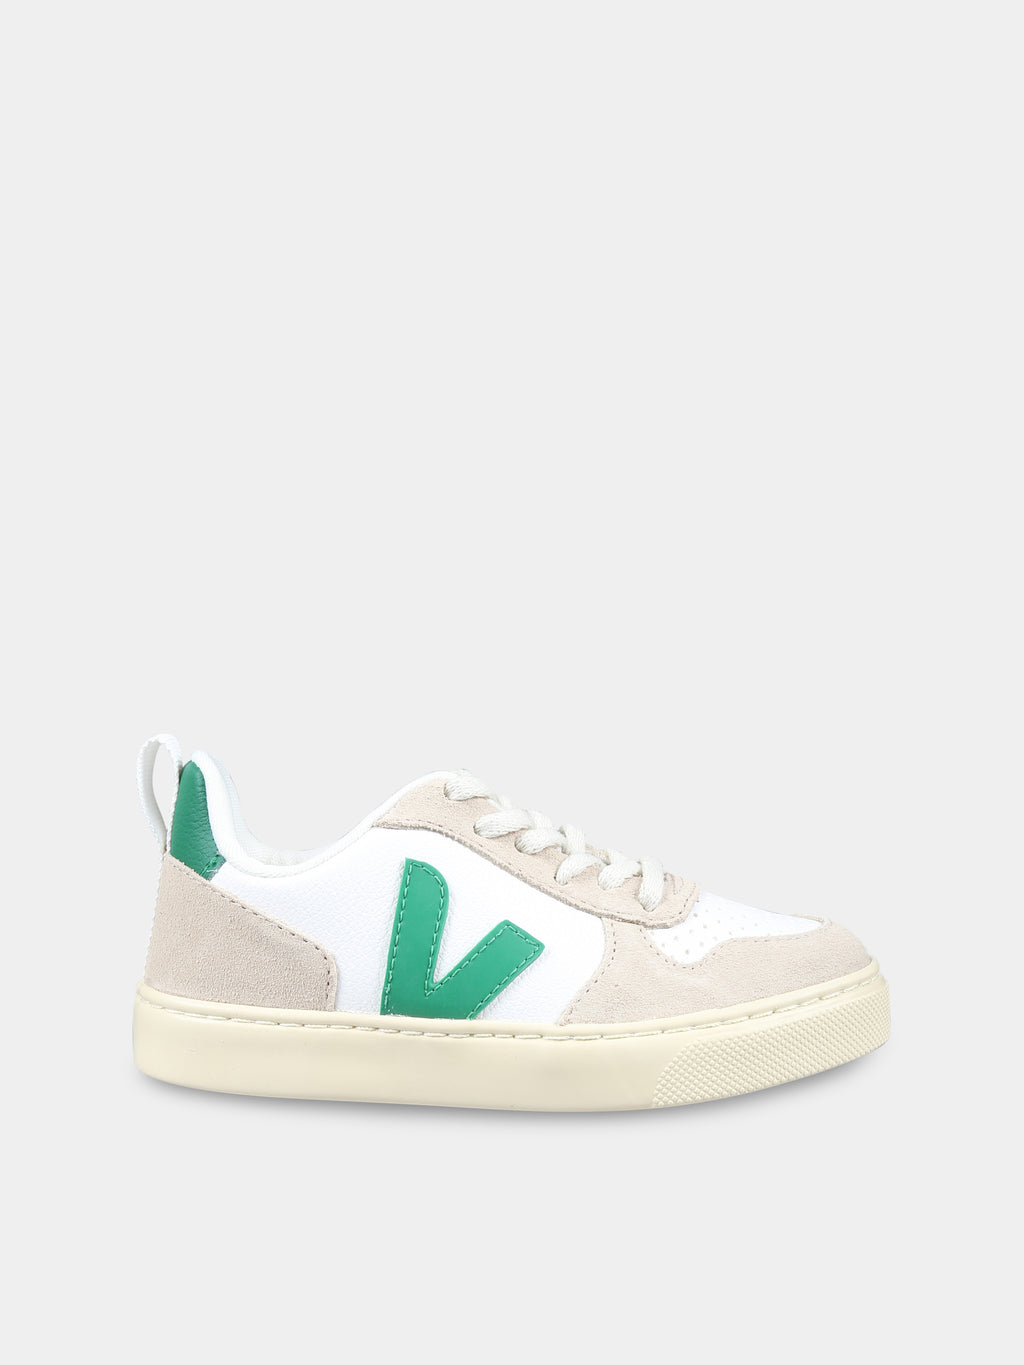 Ivory sneakers for kids with logo